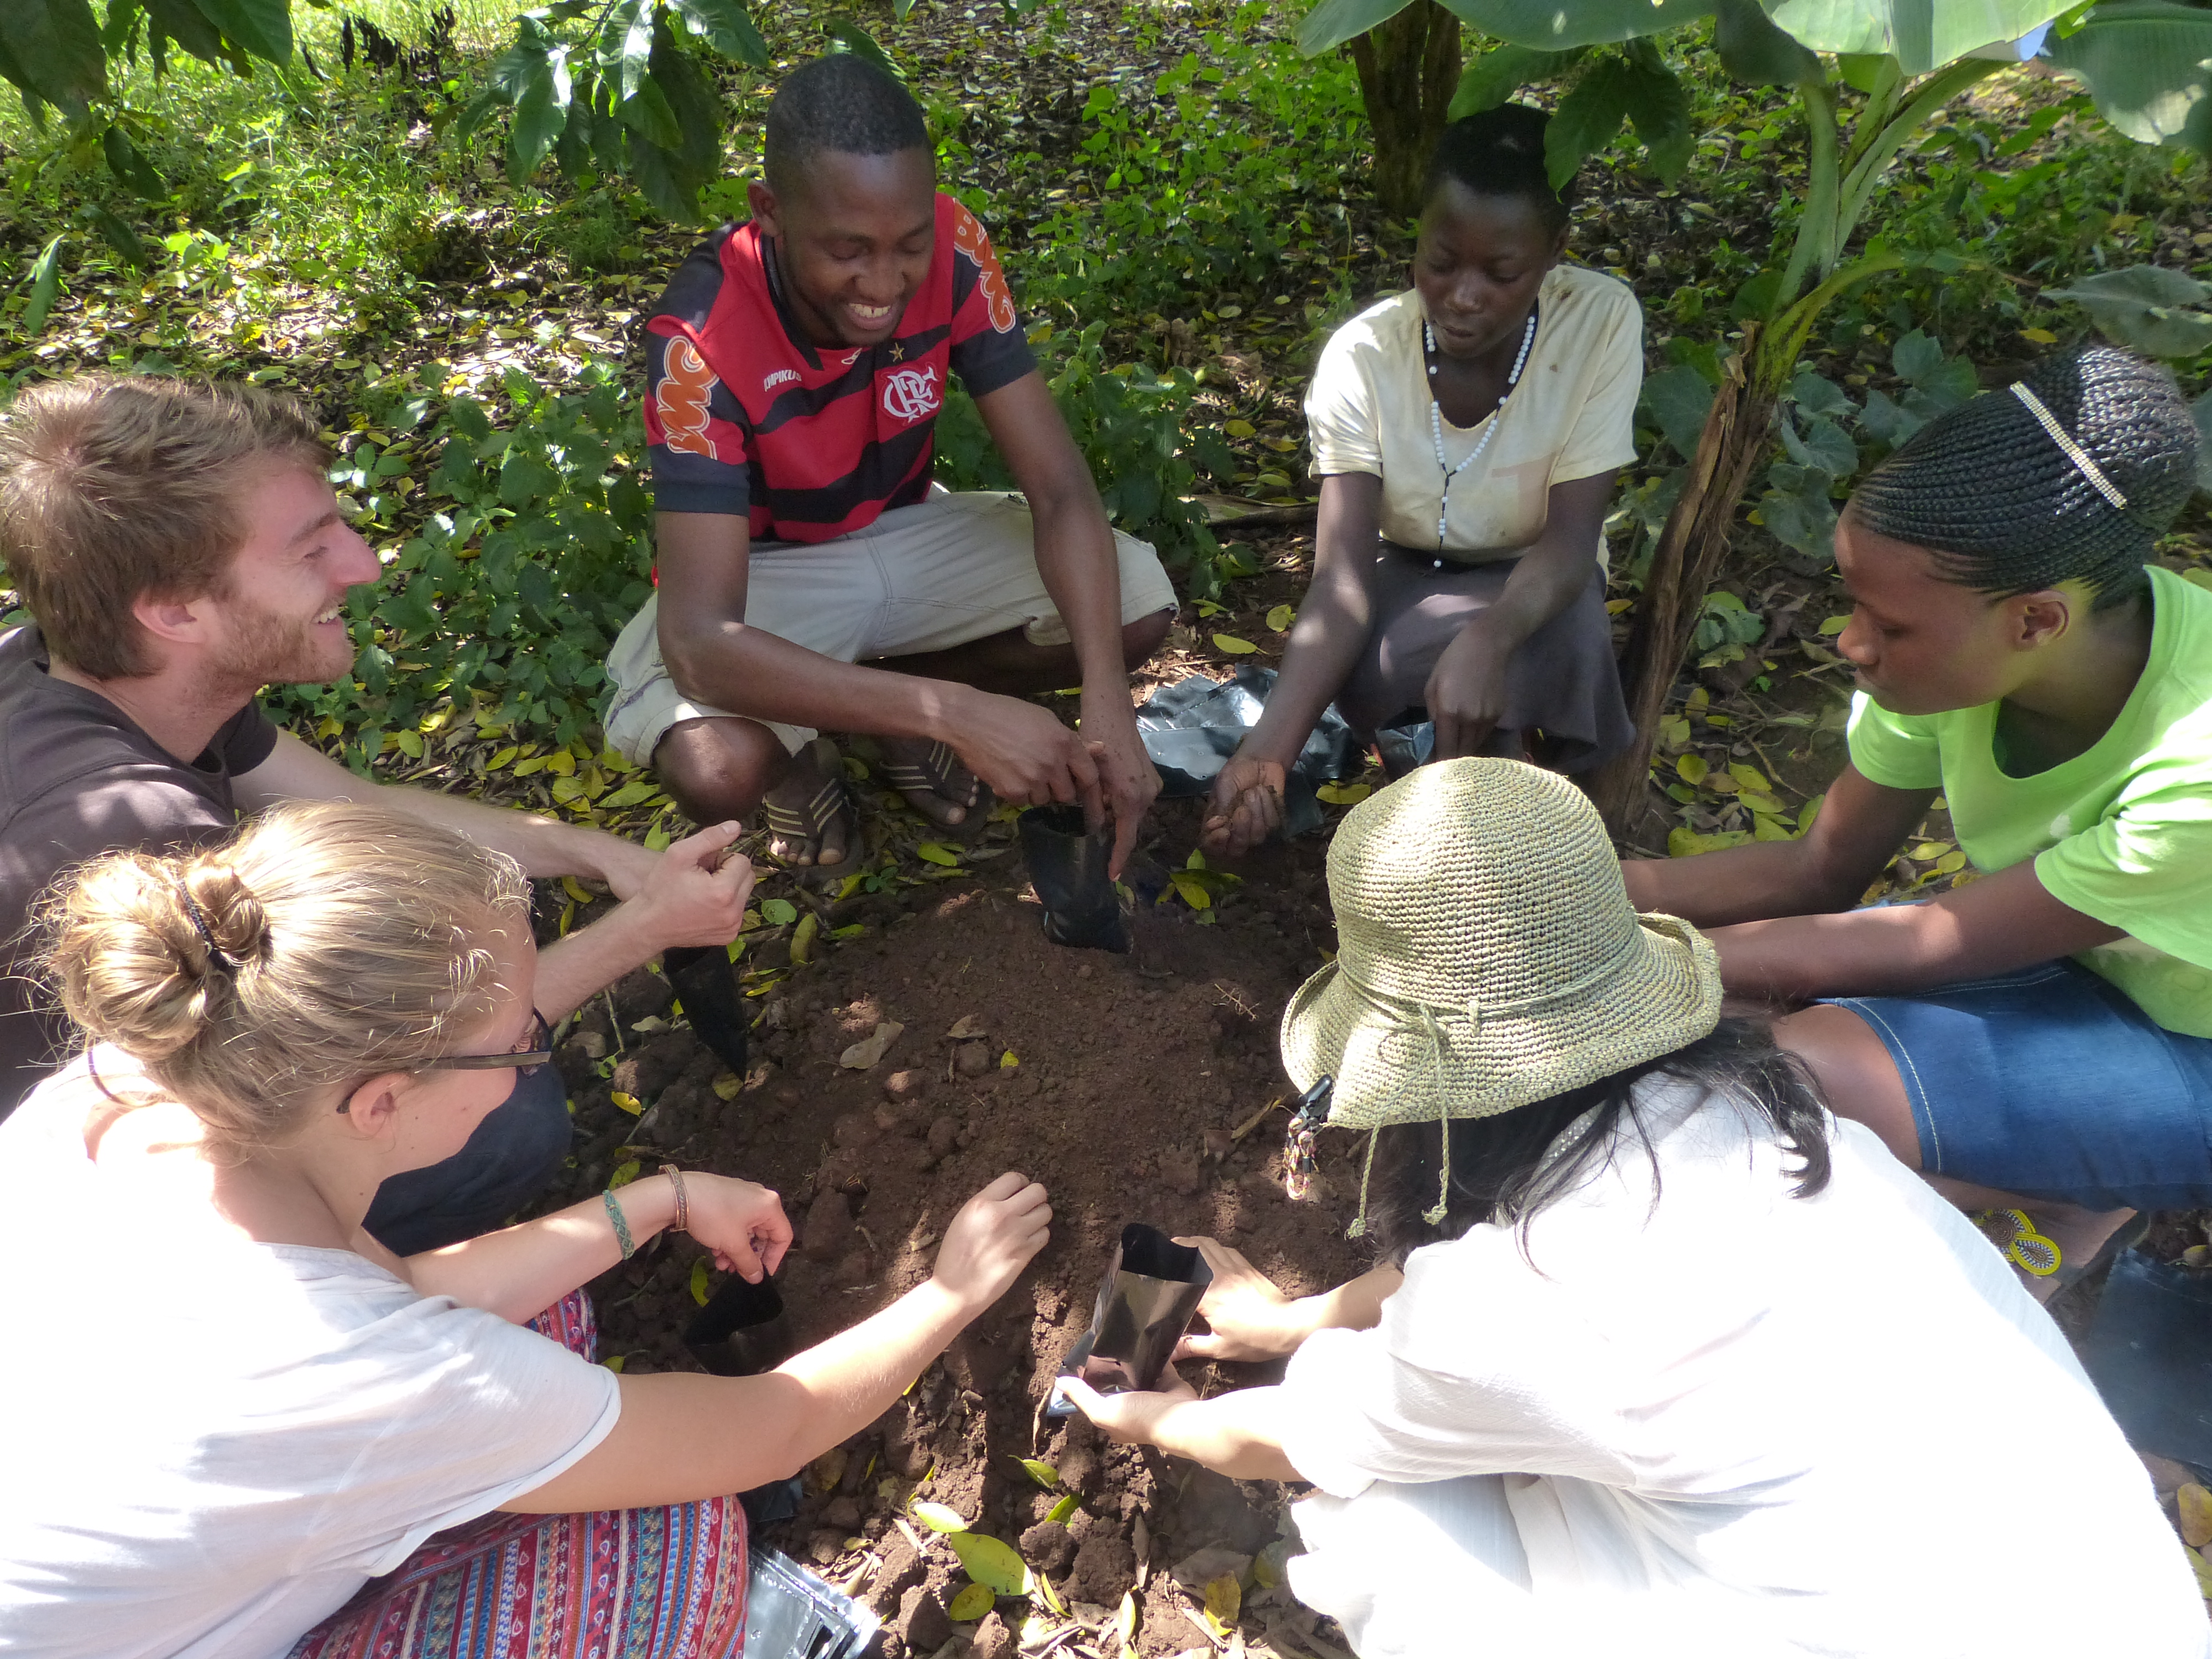 A group of six young people sit in a circle, planting seedlings in the dirt, surrounded by greenery. Three of the young people are black, a man and two women. The other three young people are white, a man and two women. One of the white women wears a beige hat, her face hidden from the camera. Both of the young men are smiling.